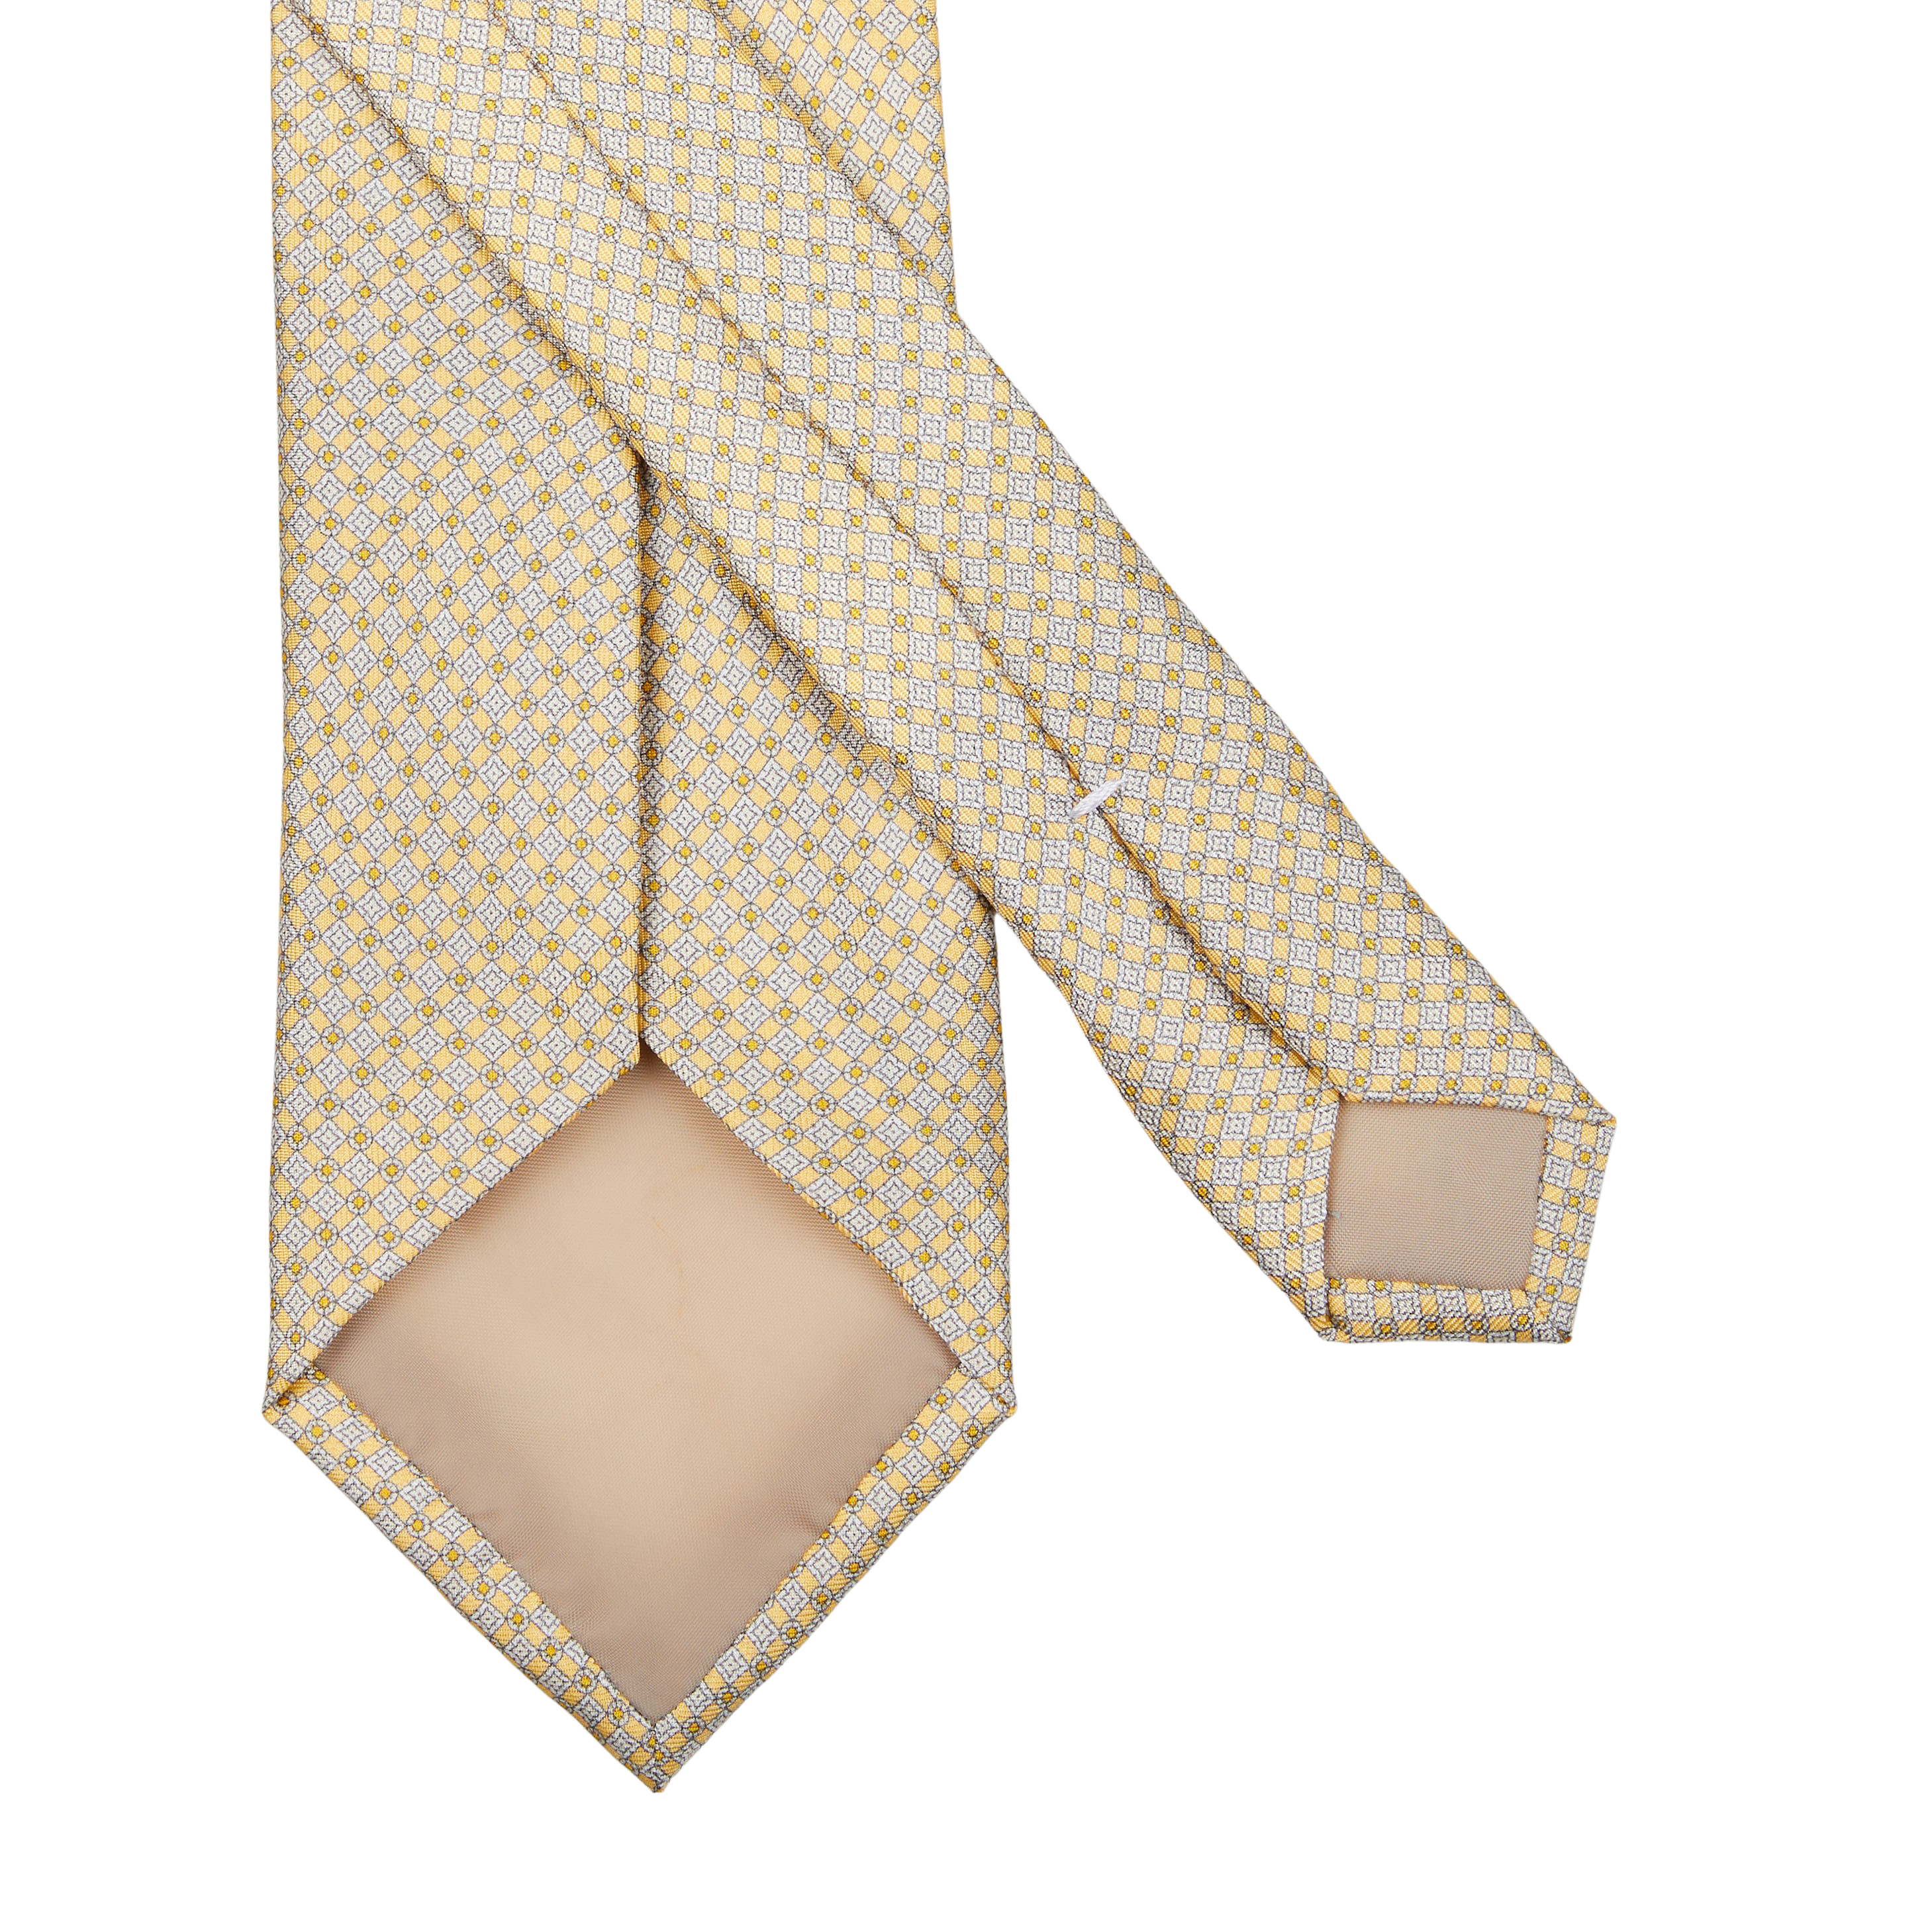 Yellow and white polka dot pure silk tie
could be rewritten as: 
Yellow Micro Medallion Printed Silk Lined Tie by Amanda Christensen.